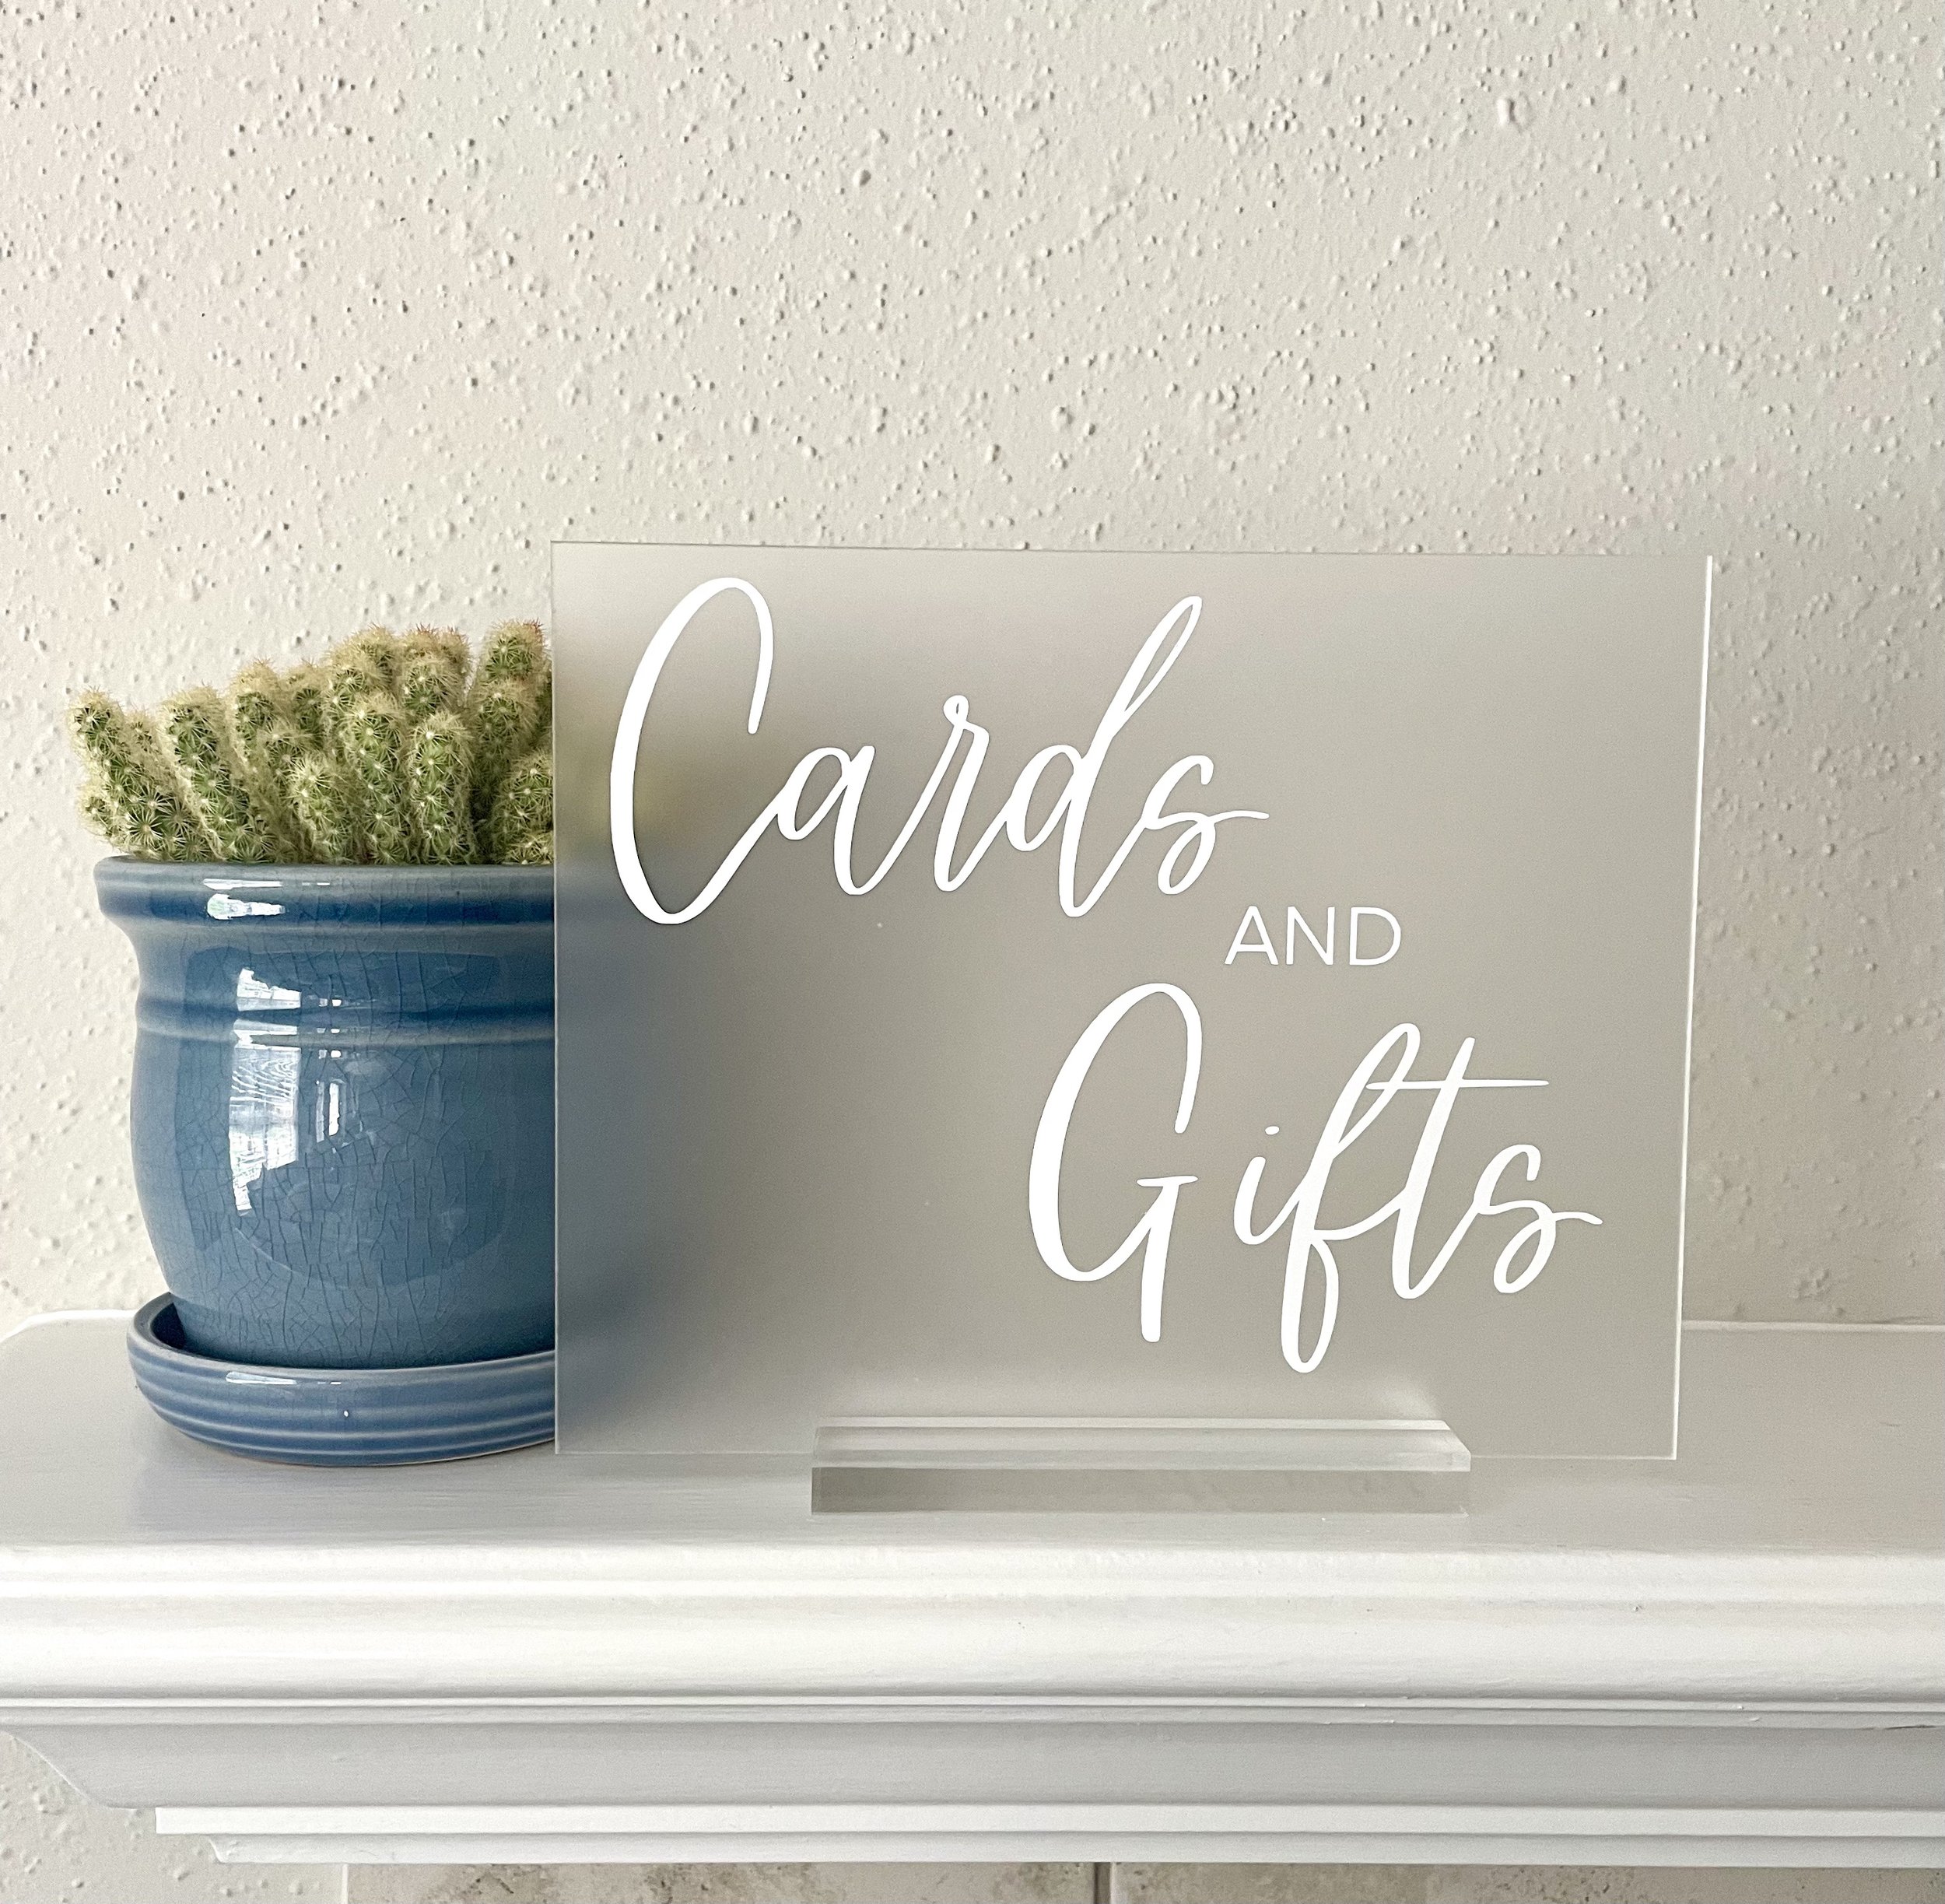 8x10 cards &amp; gifts frosted acrylic